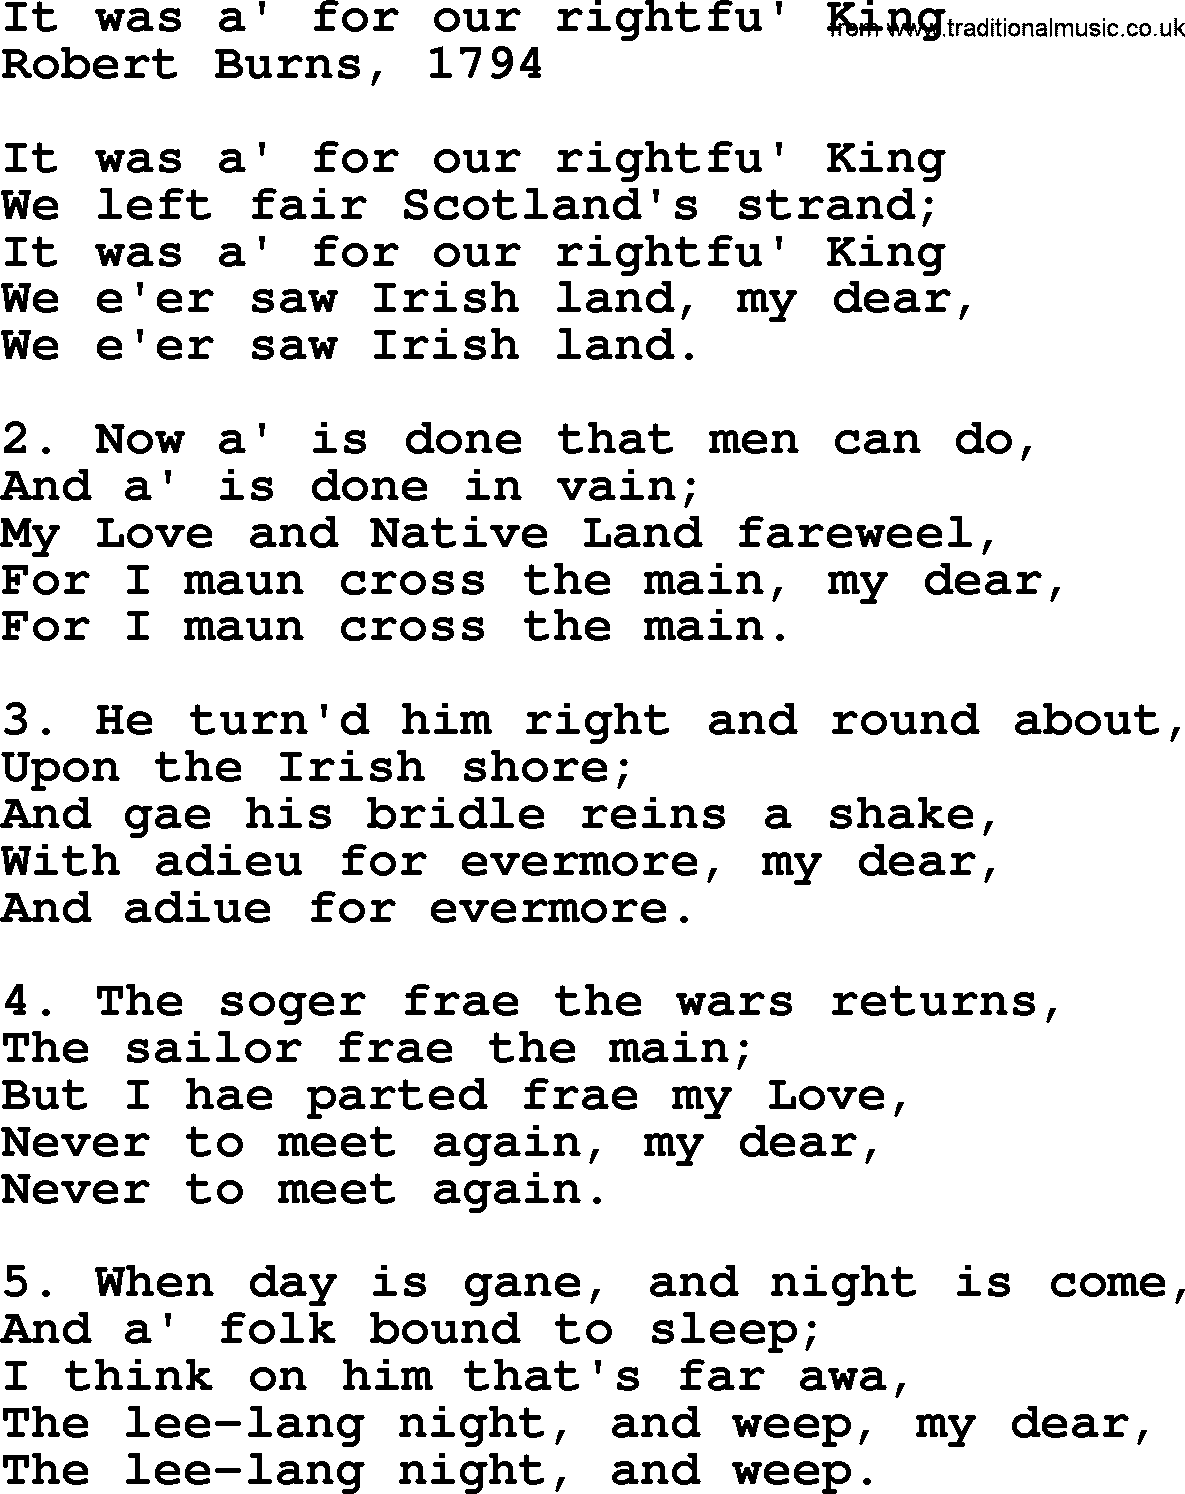 Robert Burns Songs & Lyrics: It Was A' For Our Rightfu' King